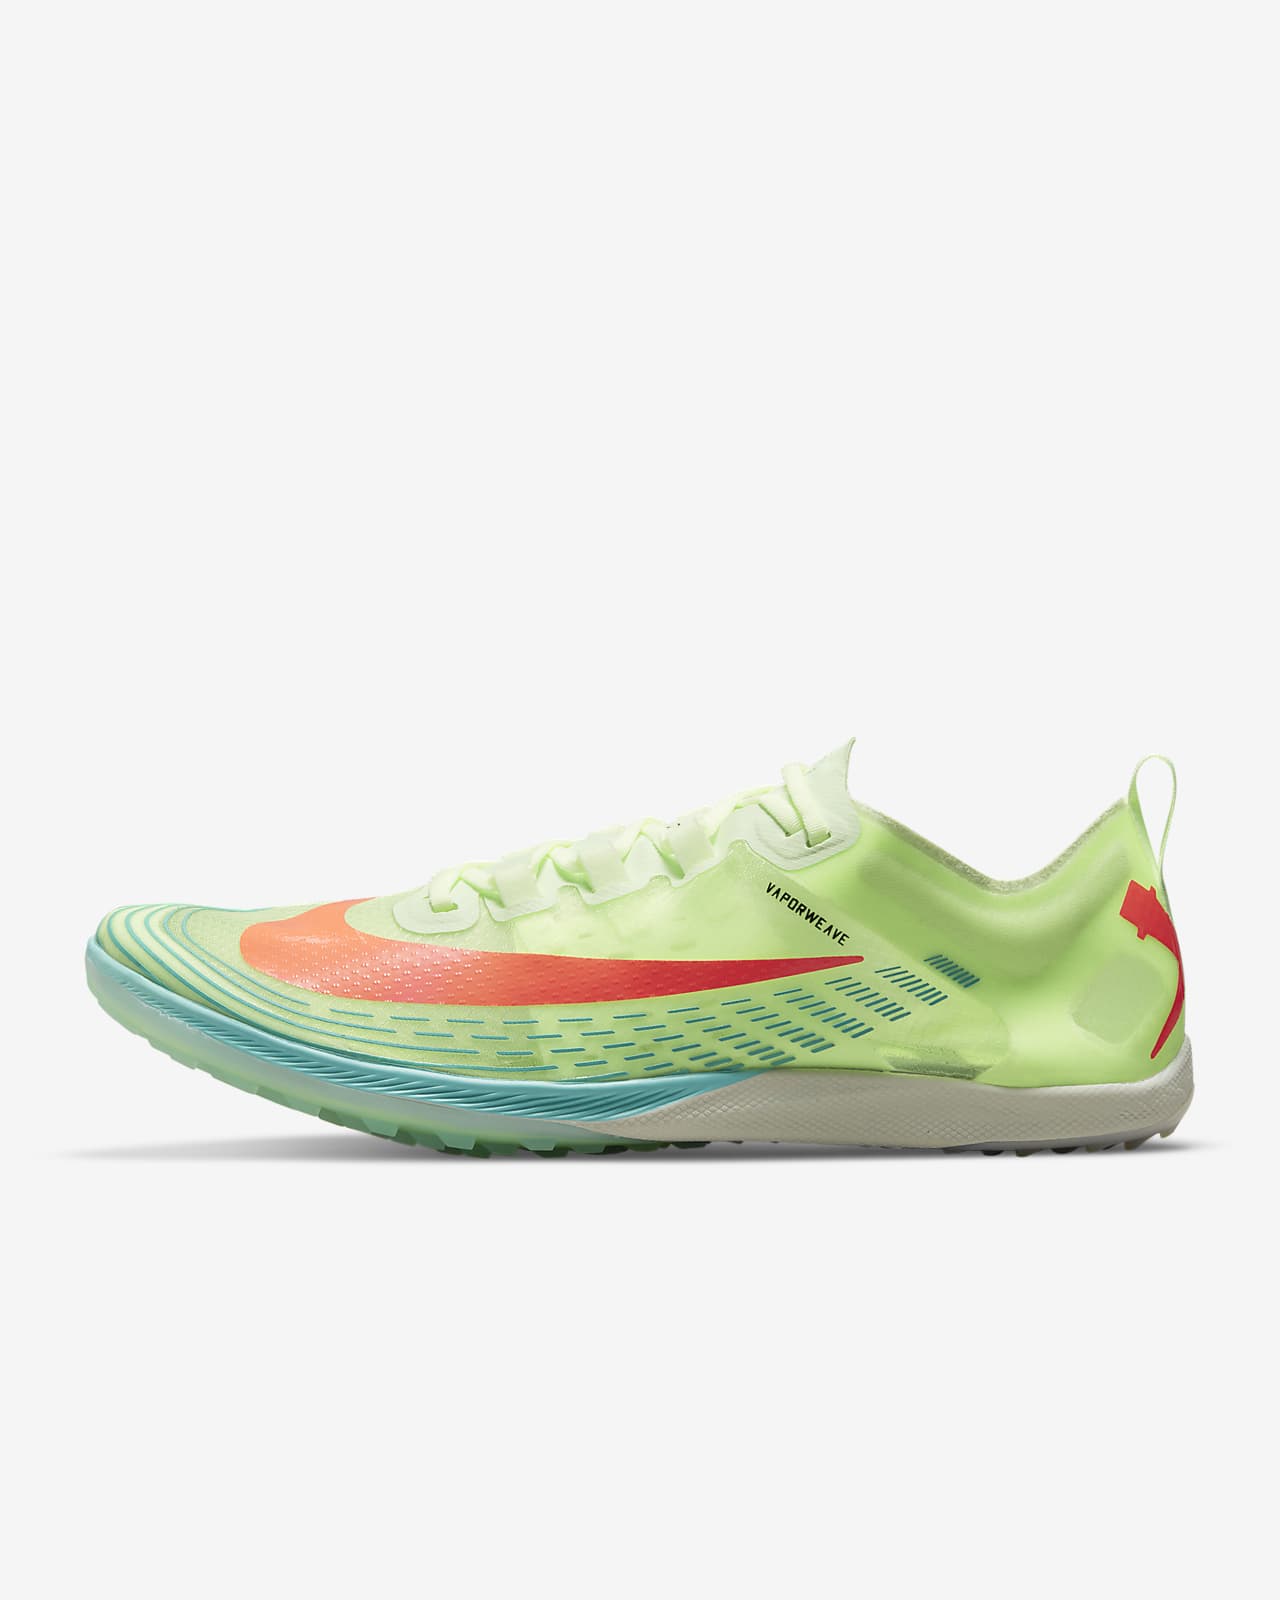 nike store track package